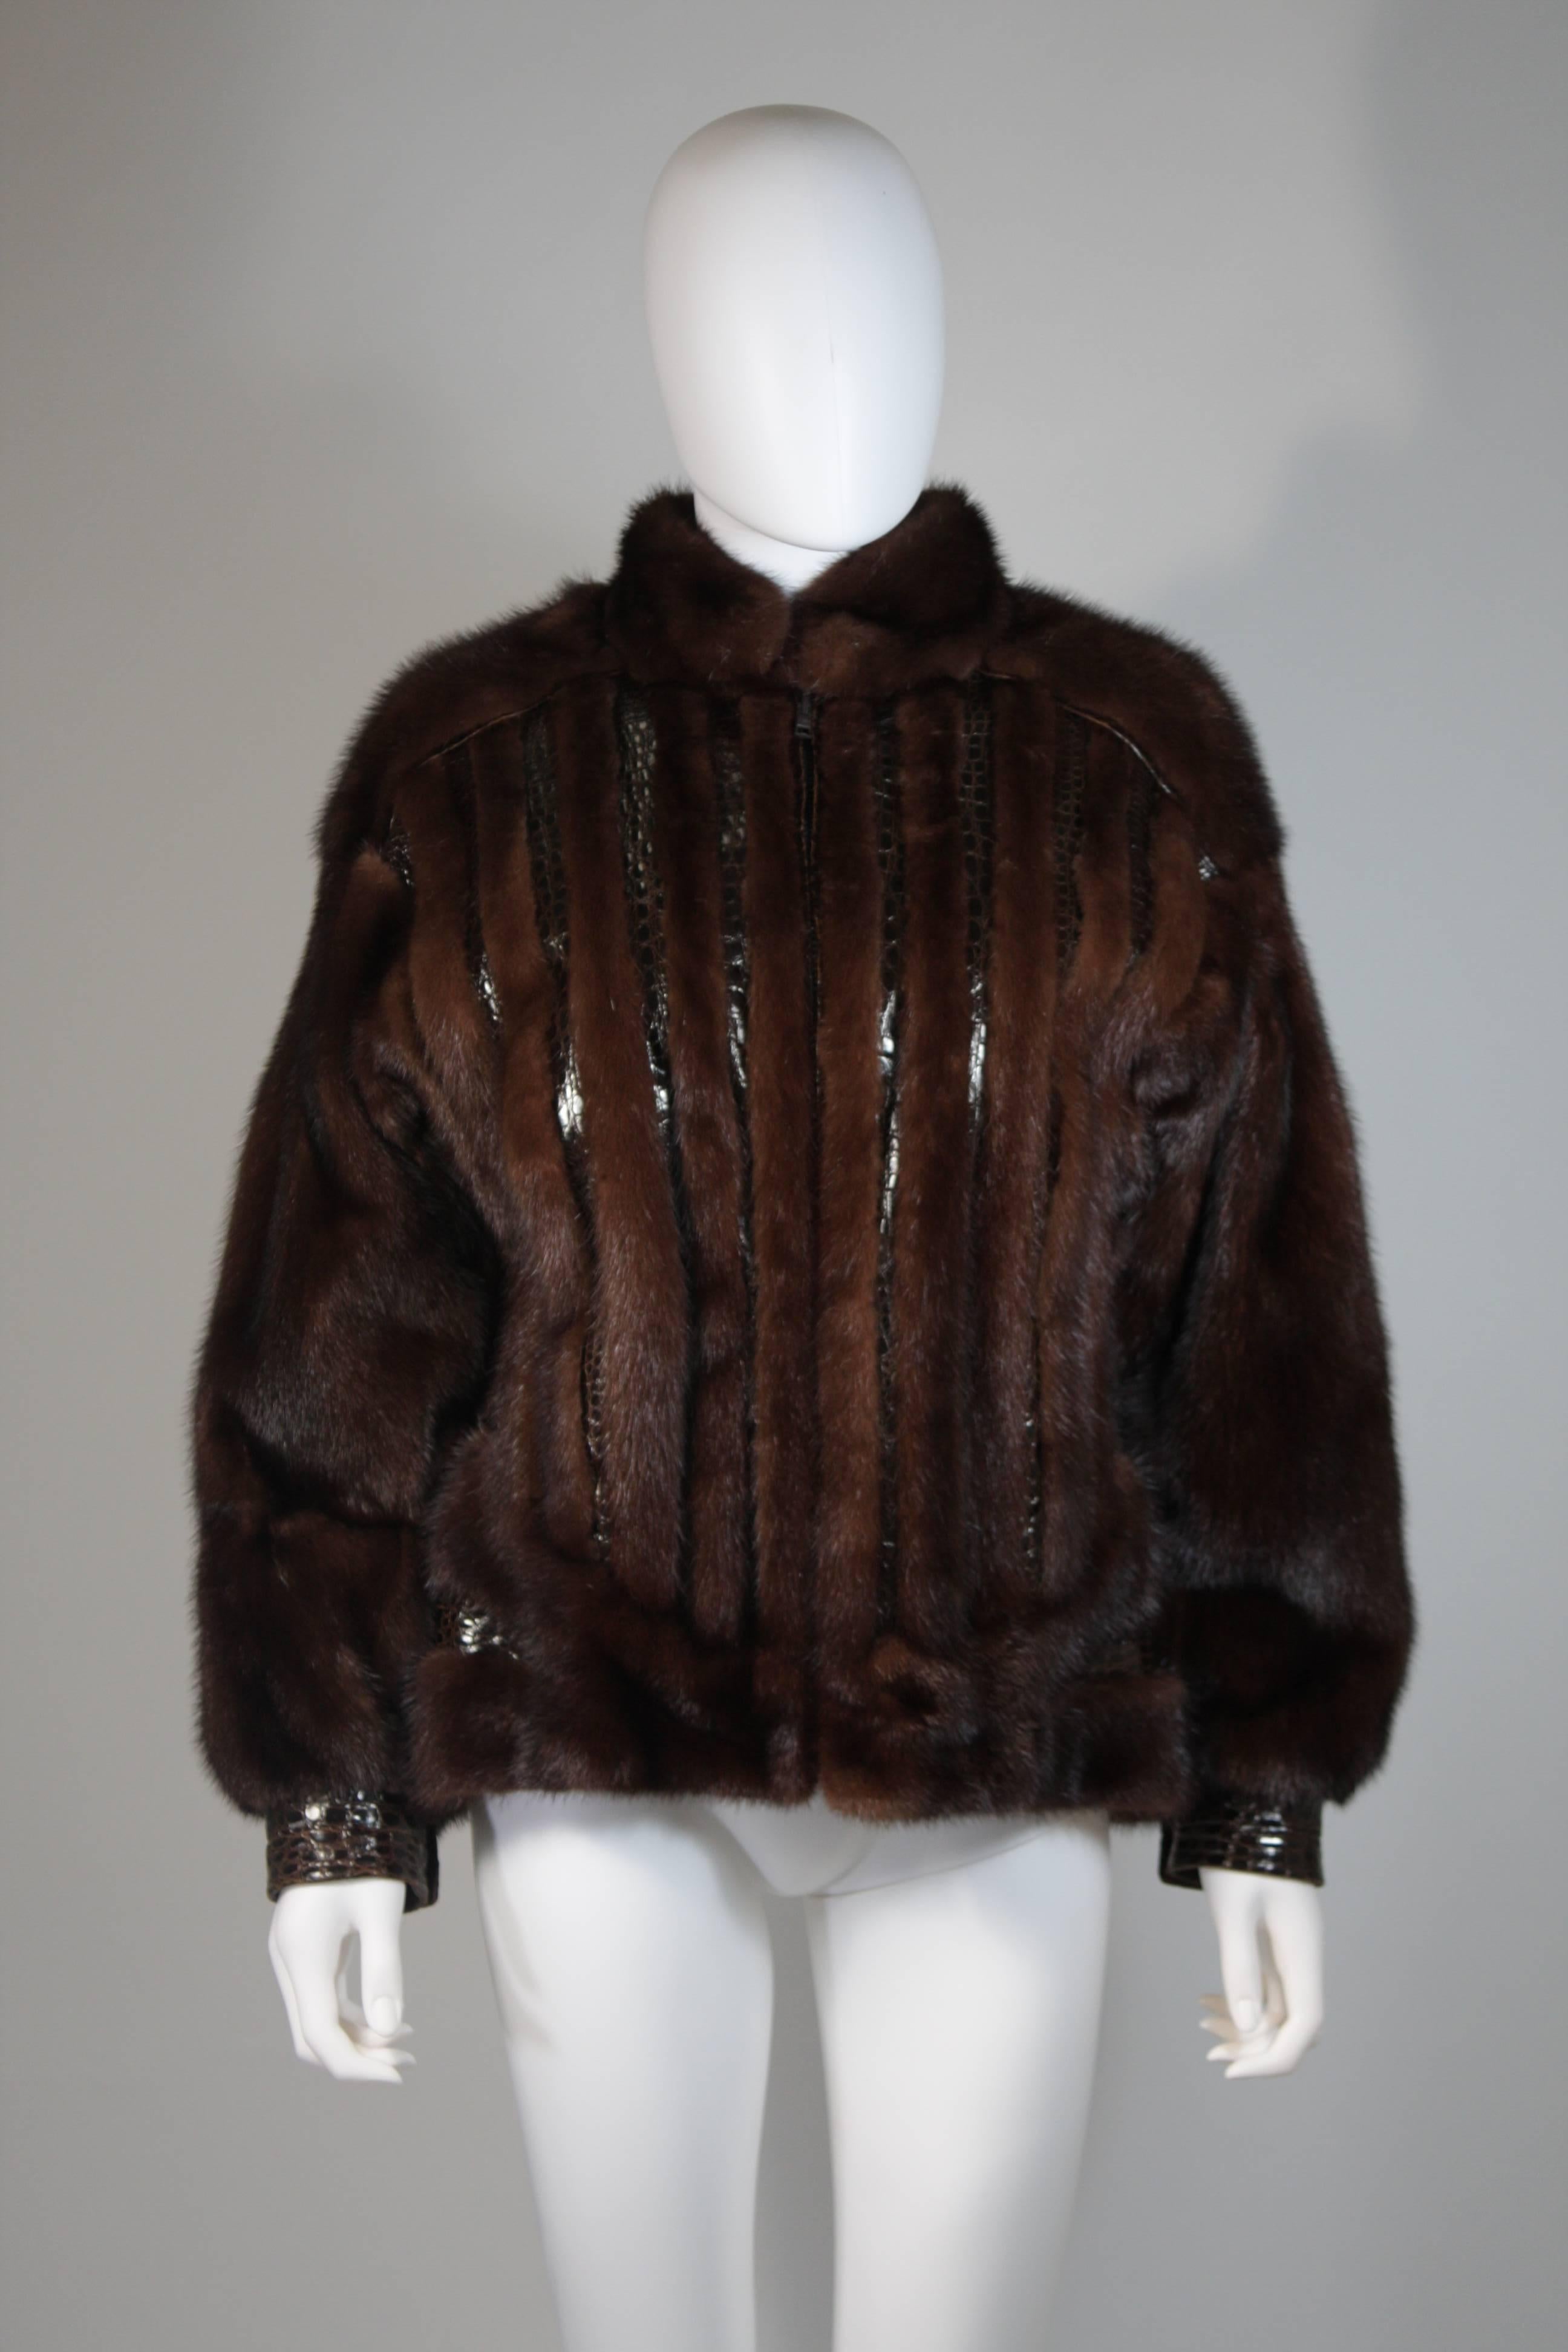 This Giorgio Sant'Angelo coat is composed of a rich brown mink and alligator combination with leather trimming/accents. This ultra supple coat features a center front zipper closure and side pockets. This coat is in excellent condition. Very easy to